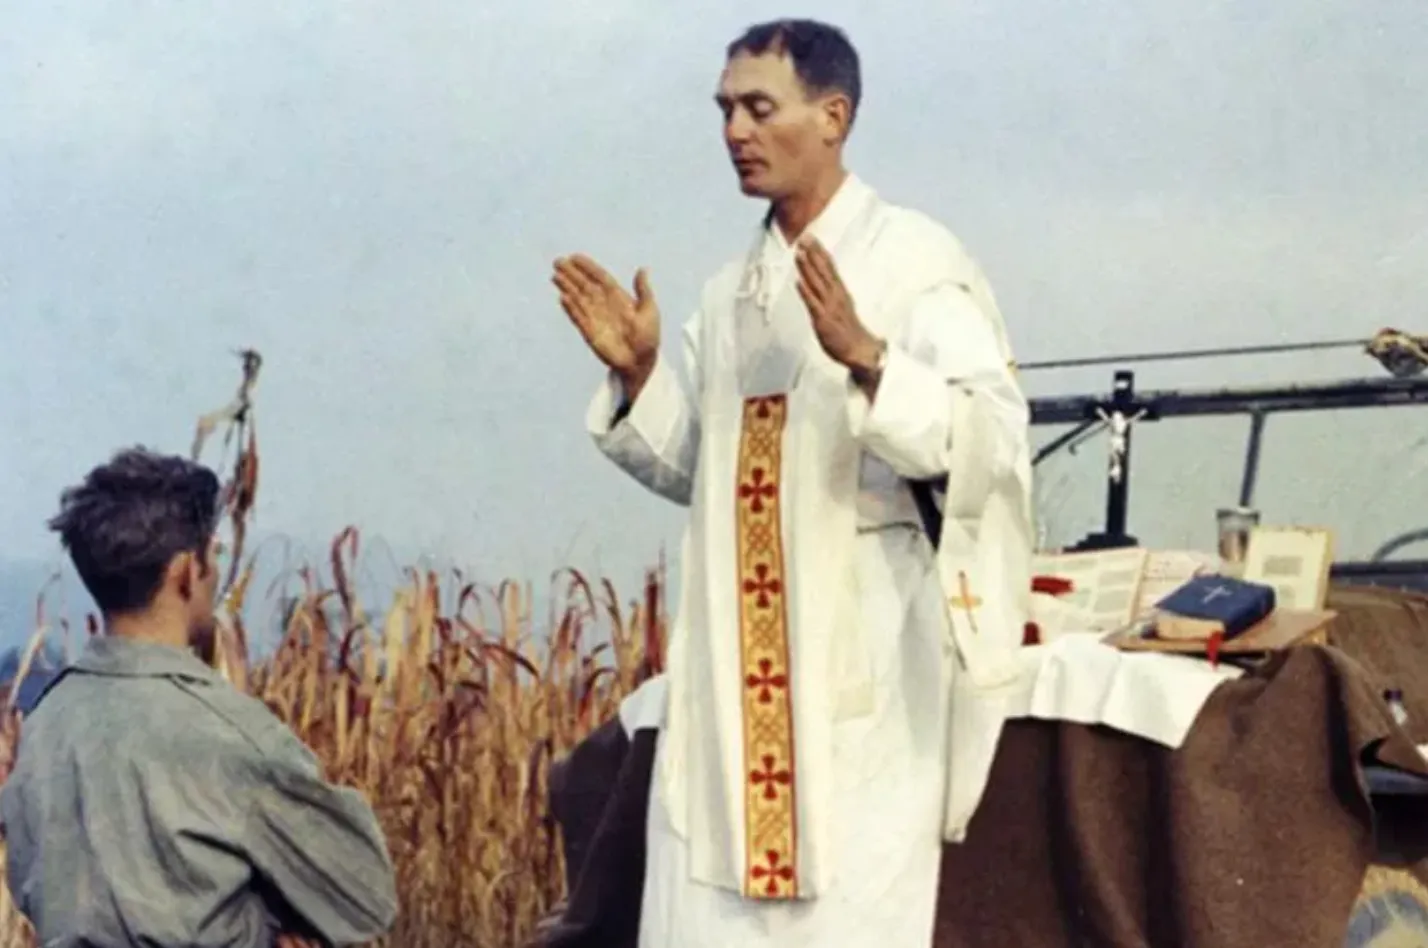 Father Emil Kapaun celebrates Mass using the hood of a Jeep as his altar on Oct. 7, 1950.?w=200&h=150